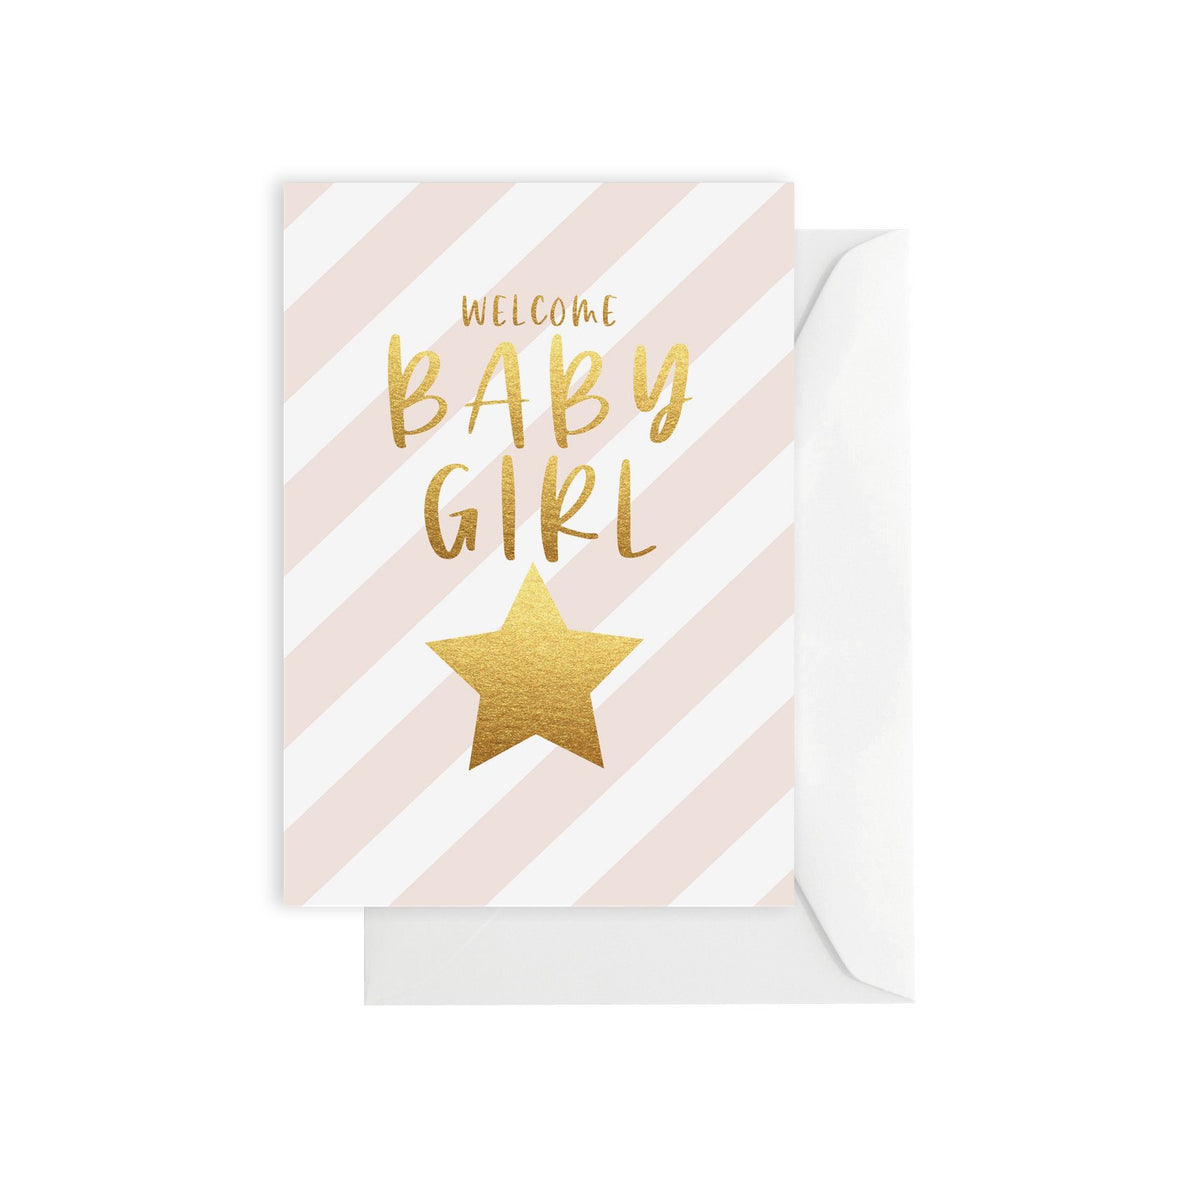 ELM Paper - Card - Baby - Baby Girl Stripe <Outgoing>